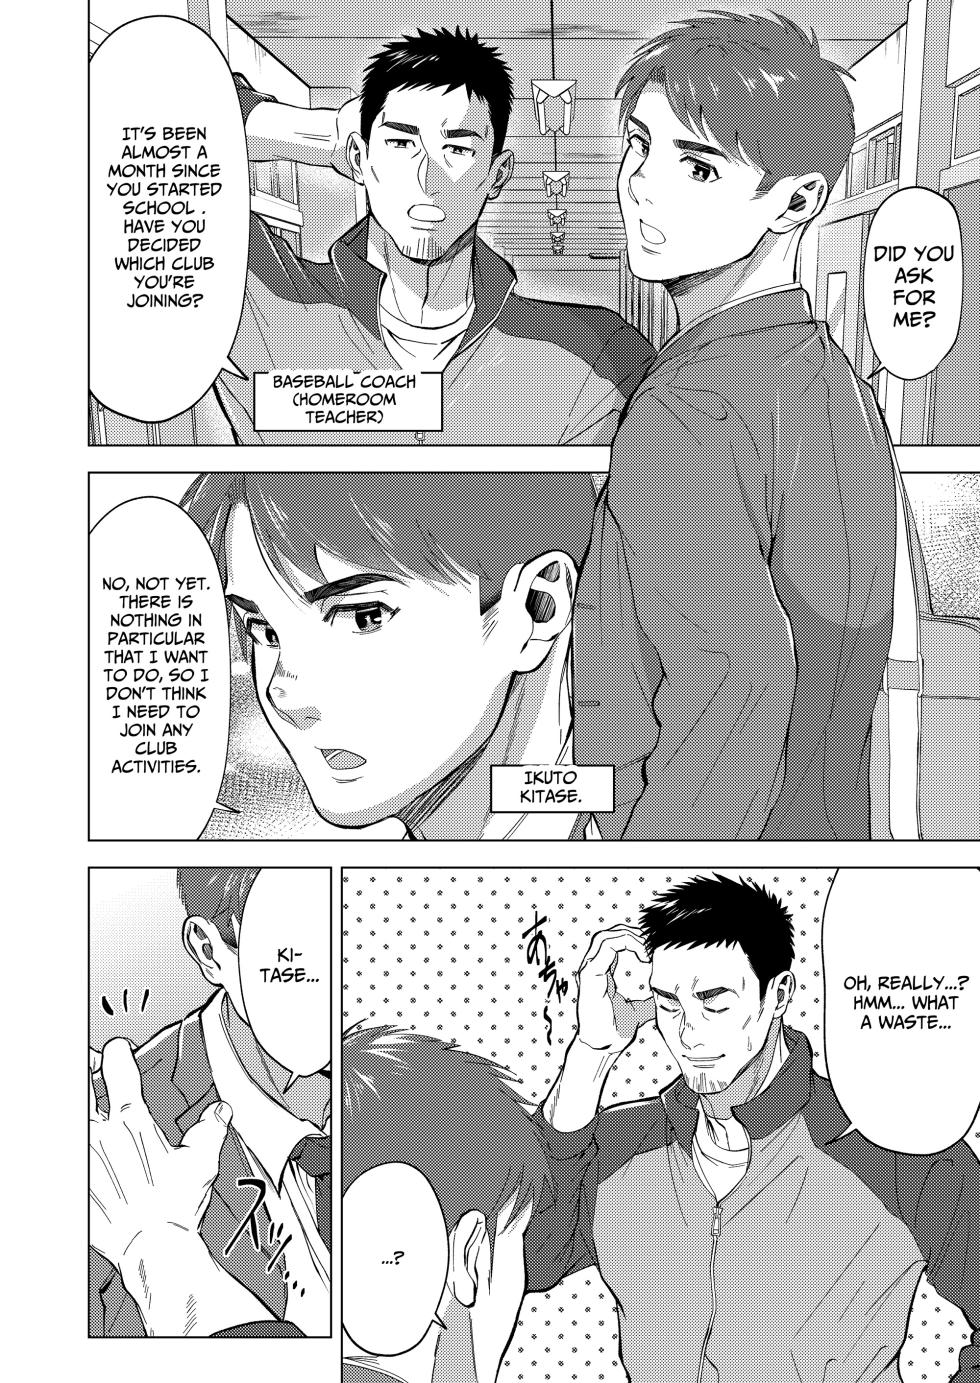 [Shiro] The sex manager of the boys' school baseball team!? [Eng] - Page 2